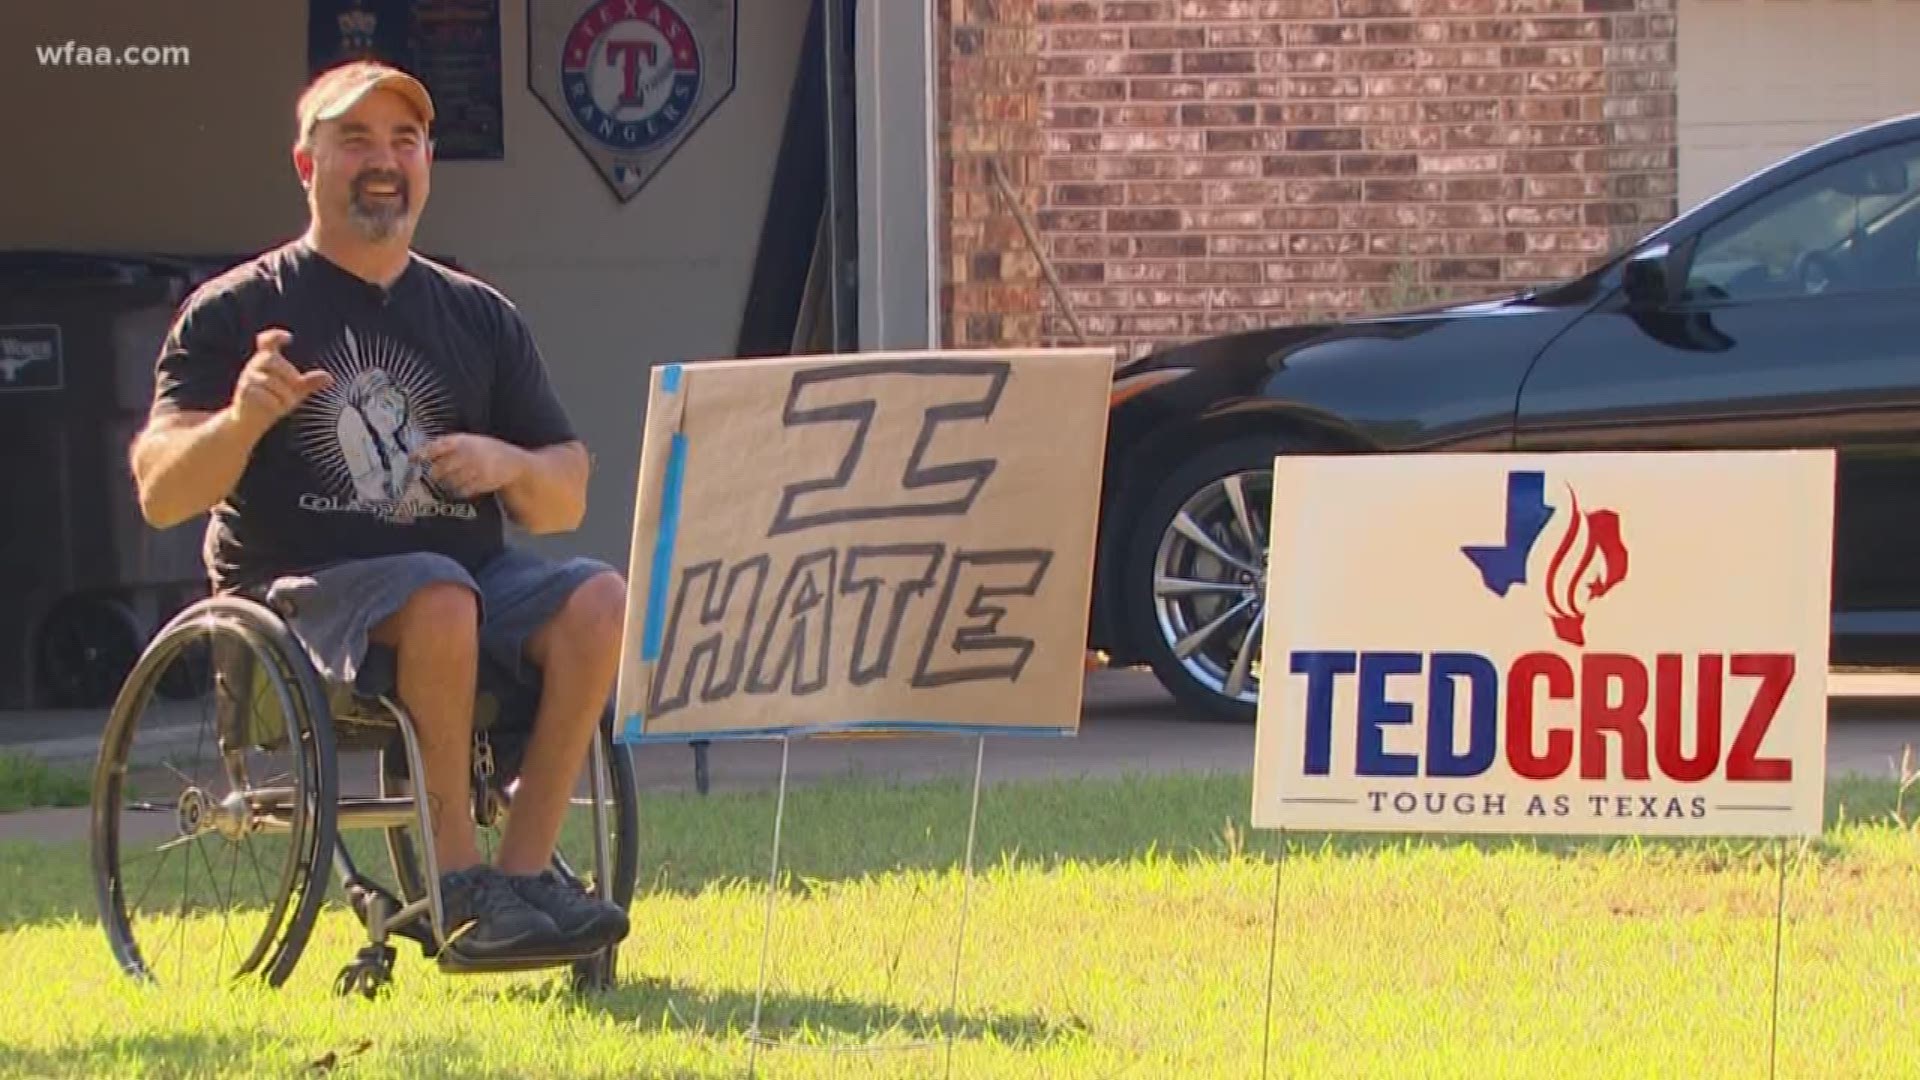 It's neighbor vs. neighbor when it comes to this Ted Cruz campaign sign